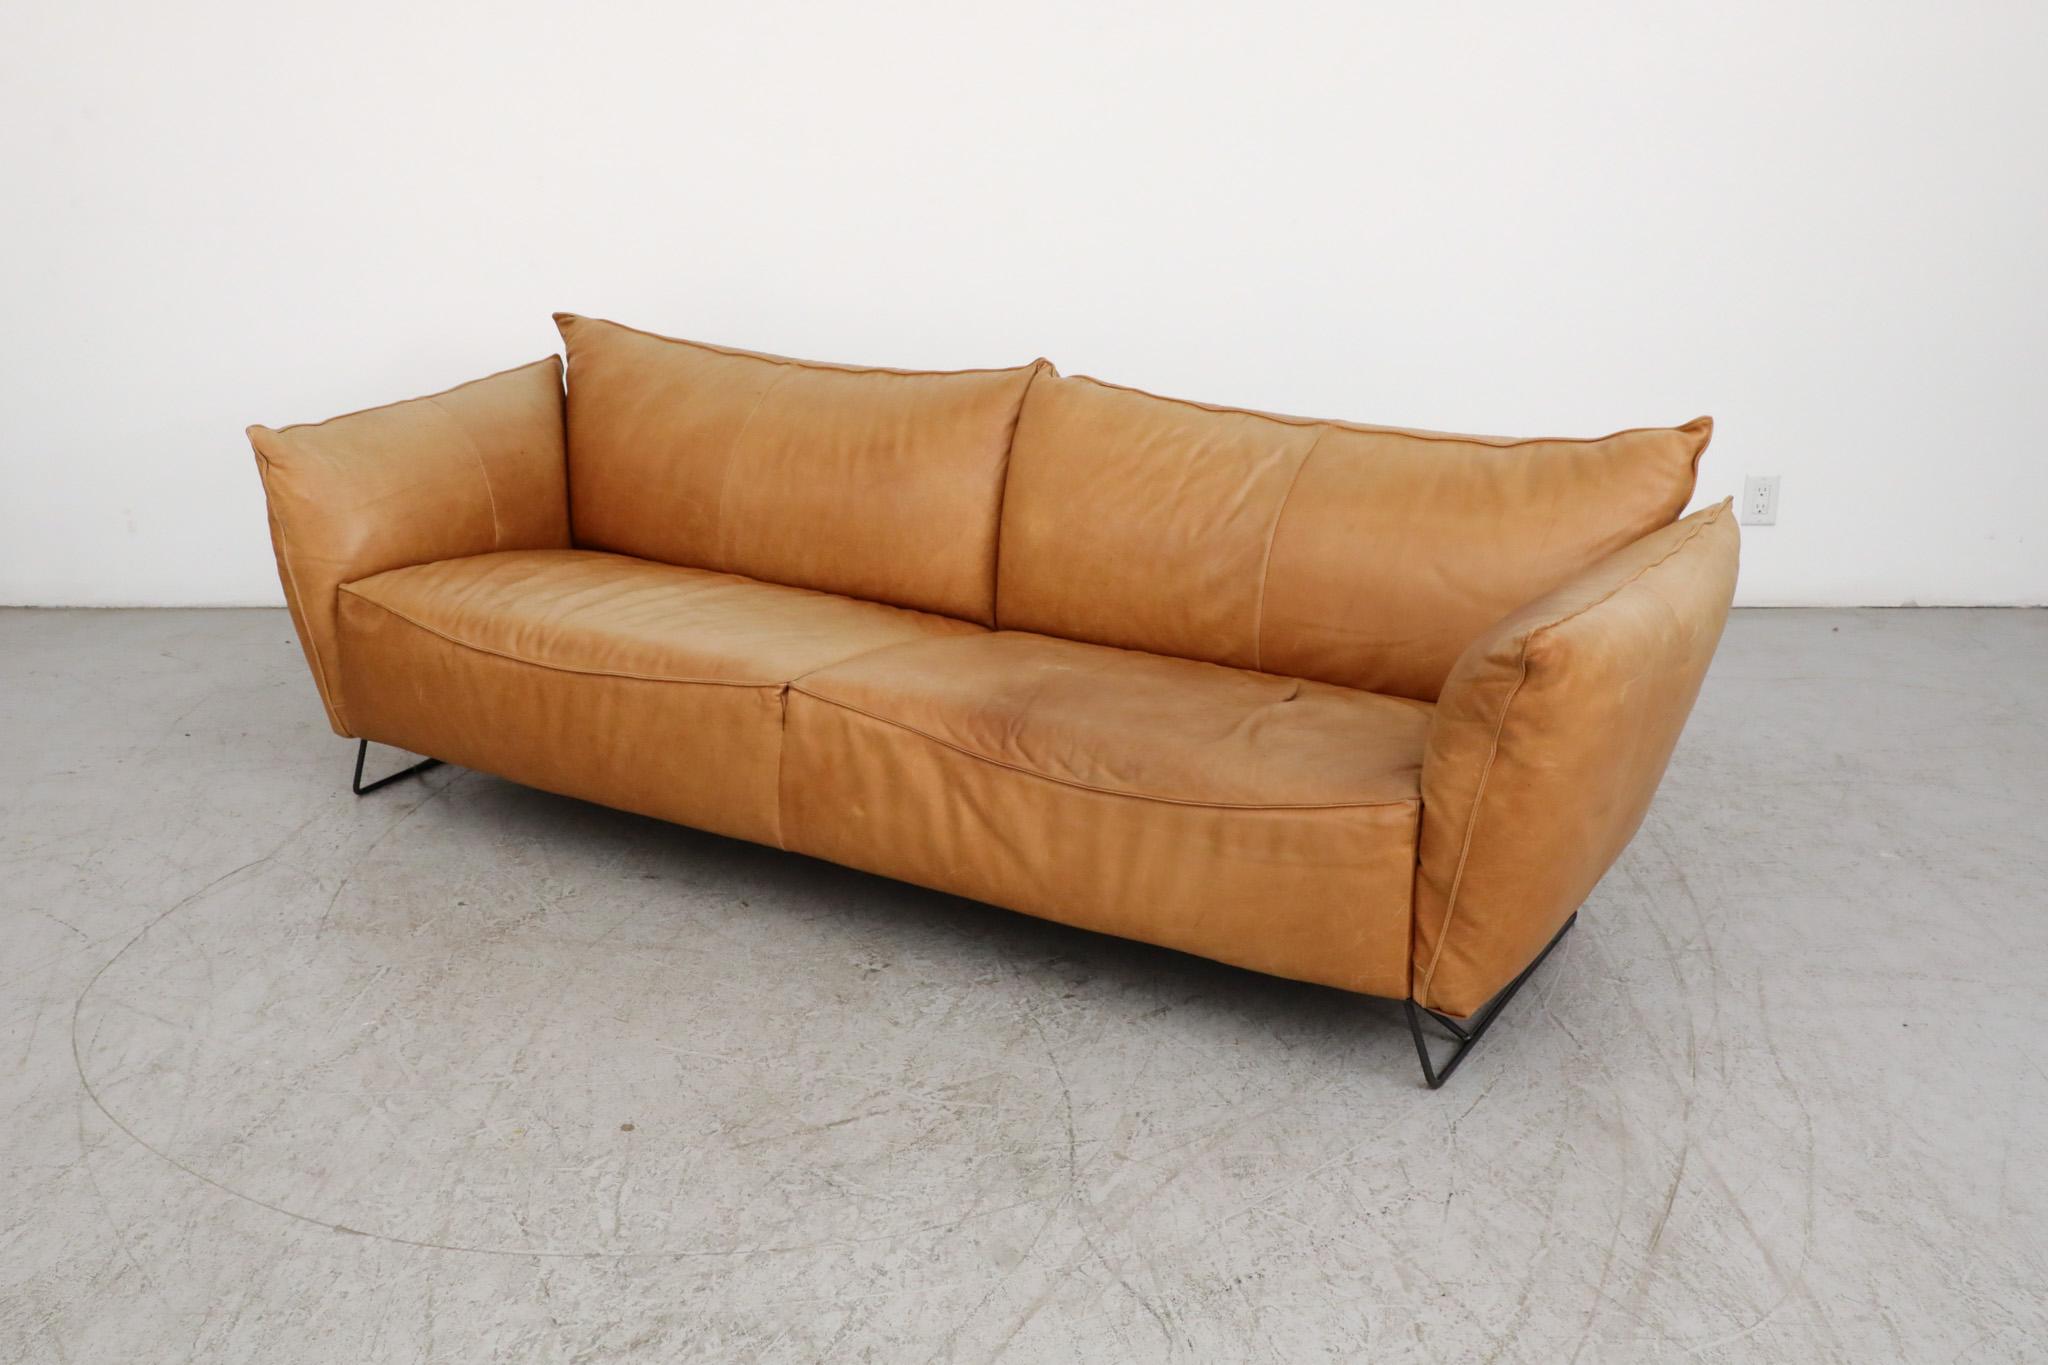 Enameled Gerard Van Den Berg style butterscotch 3 seater sofa for Jess For Sale